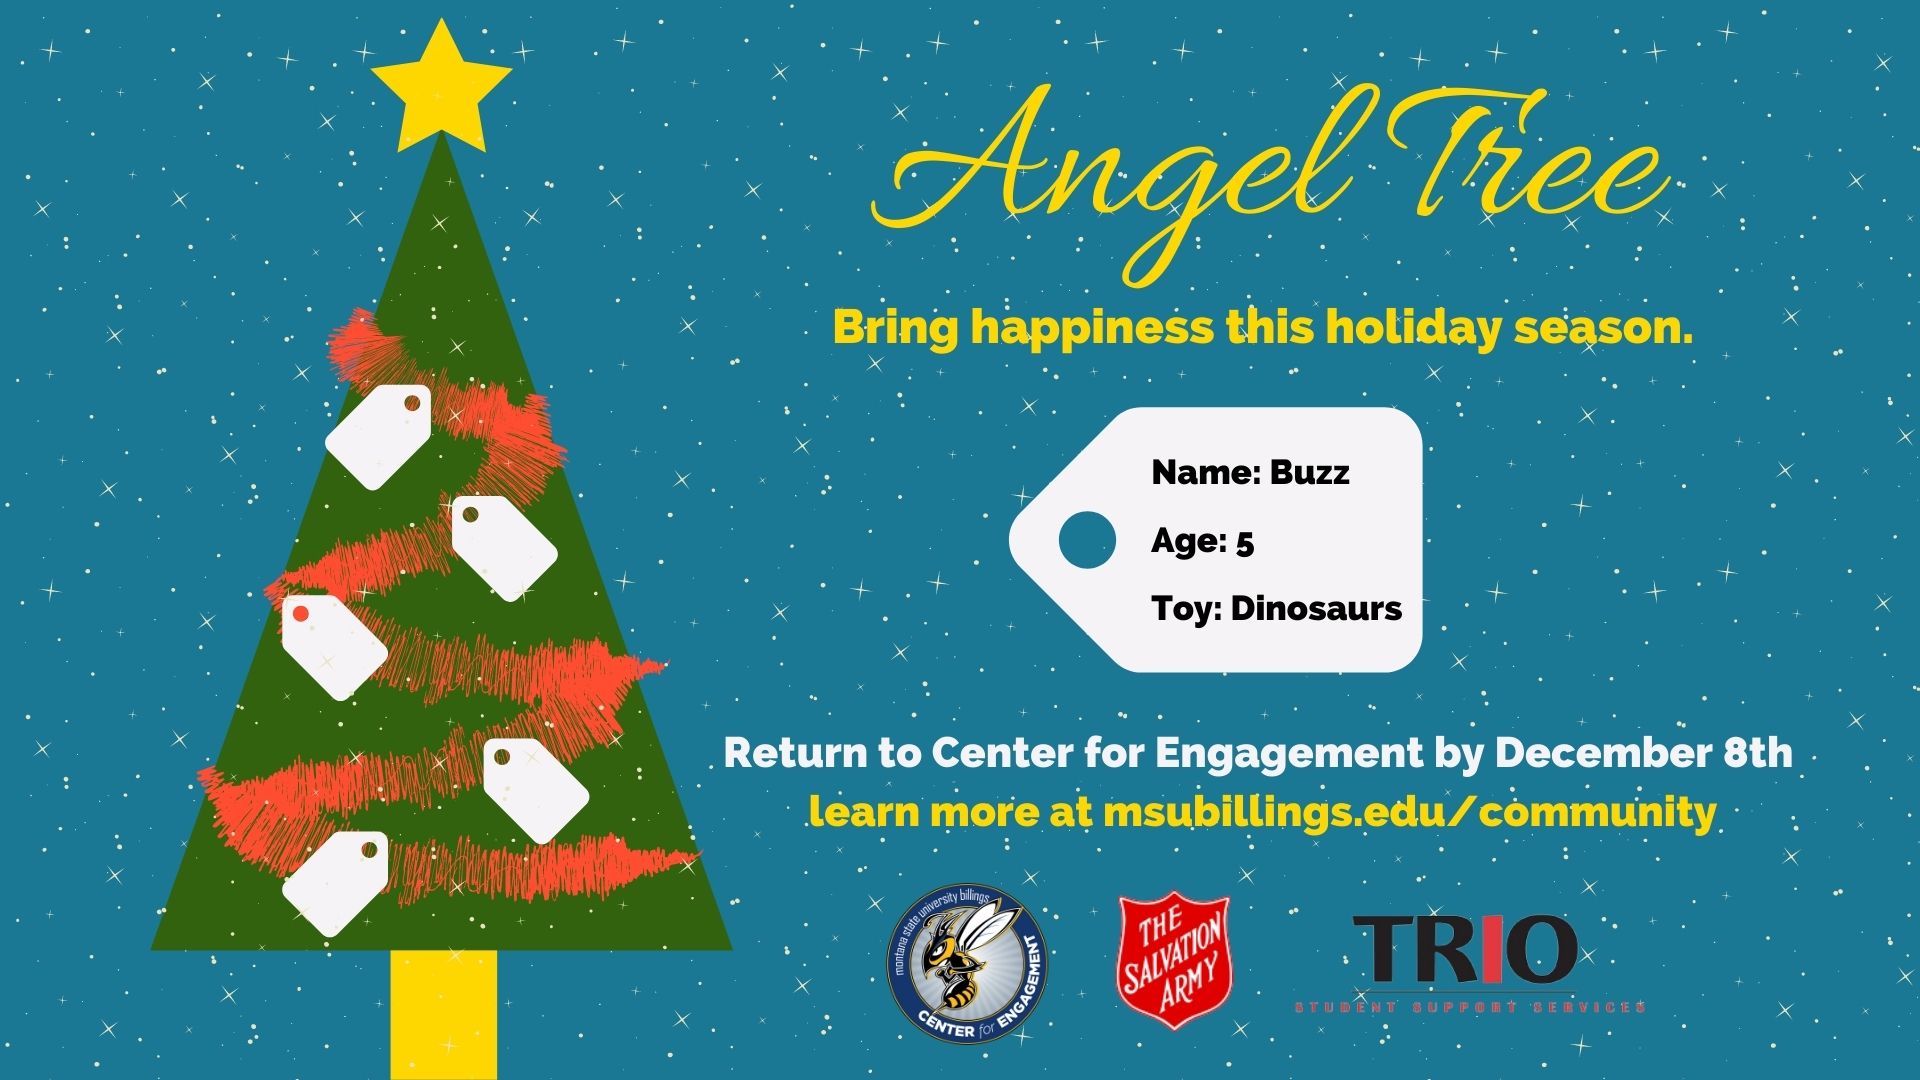 Angel Tree. Bring happiness this holiday season. Name: Buzz Age: 5 Toy: Dinosaurs. Return to Center for Engagement by December 8th . Learn more at msubillings.edu/community